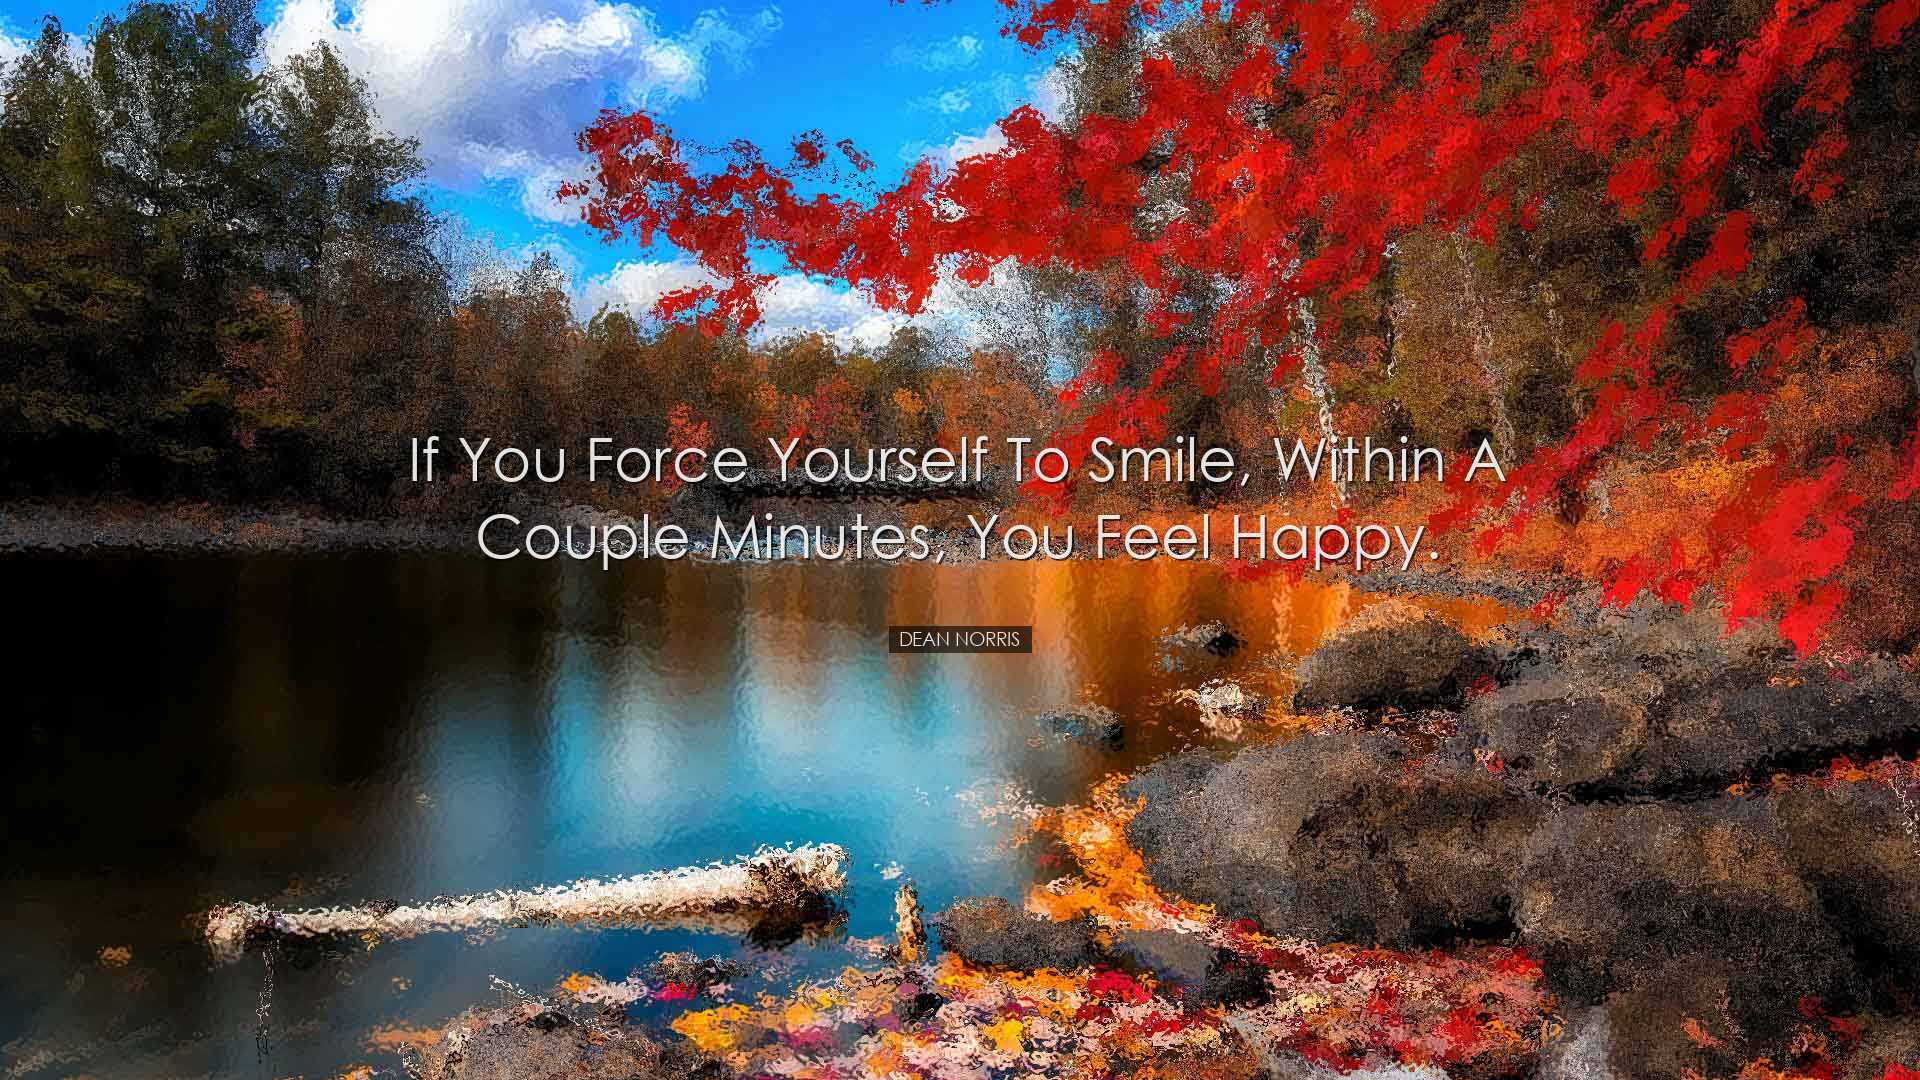 If you force yourself to smile, within a couple minutes, you feel